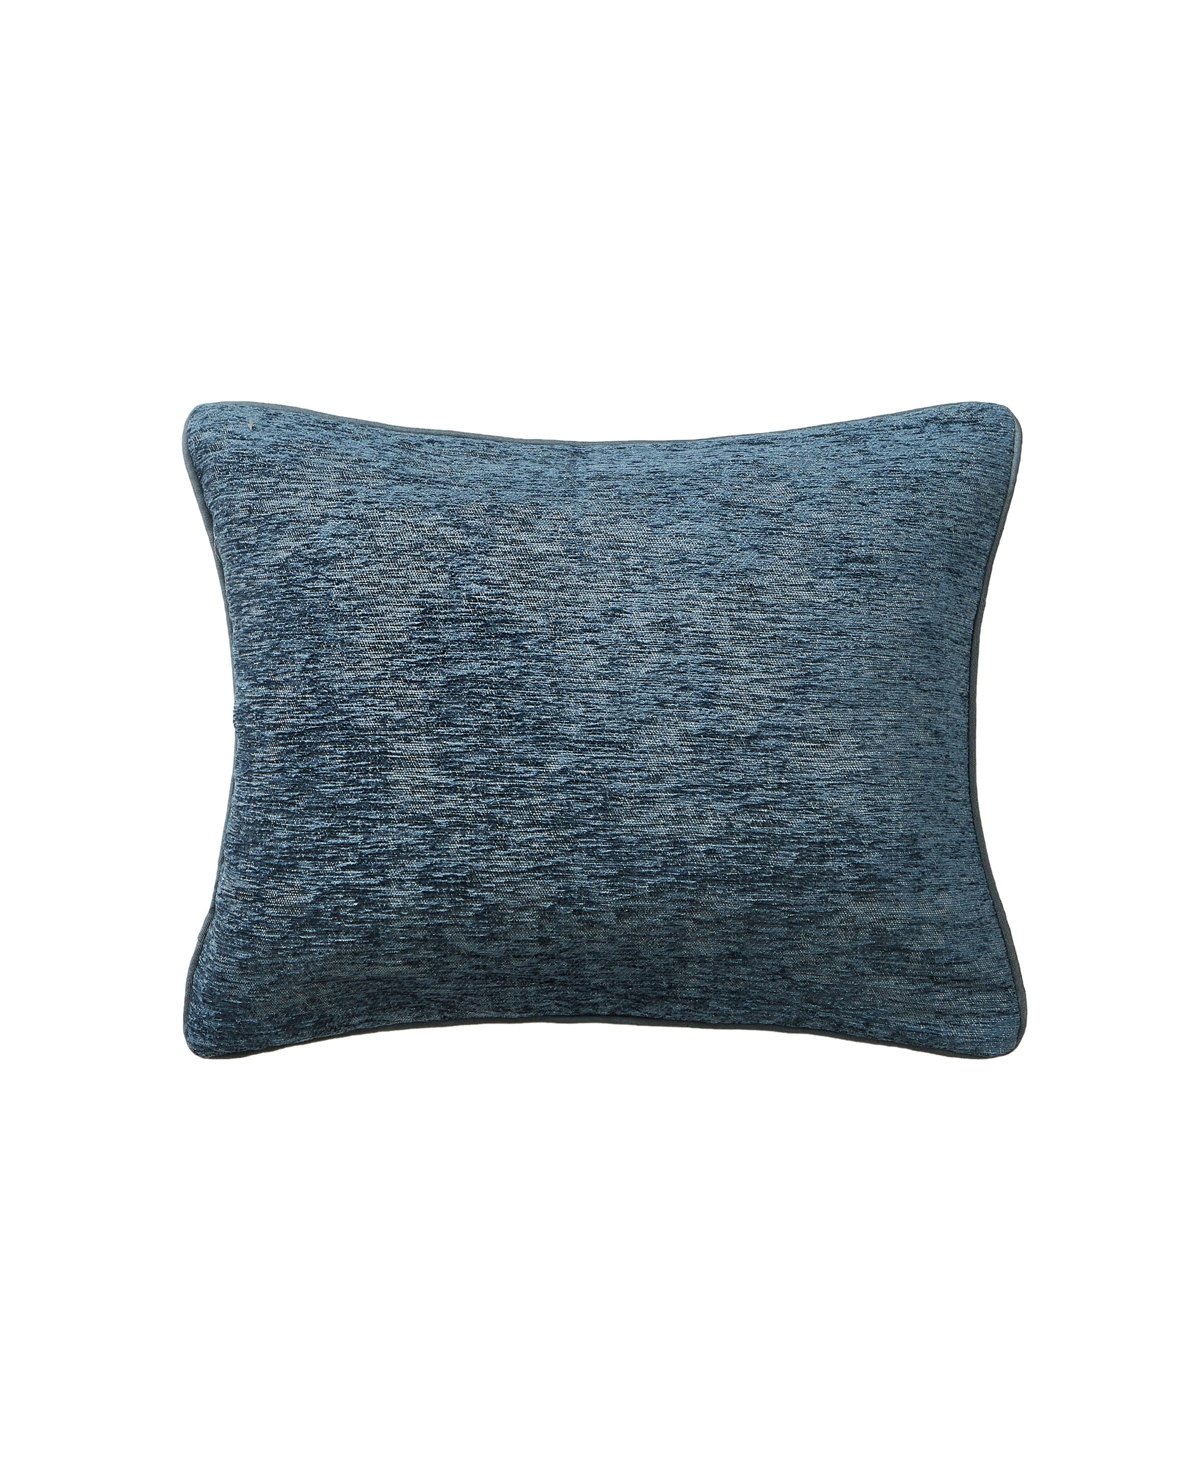 Shop Waterford Laurent 3 Piece Decorative Pillows Set In Navy